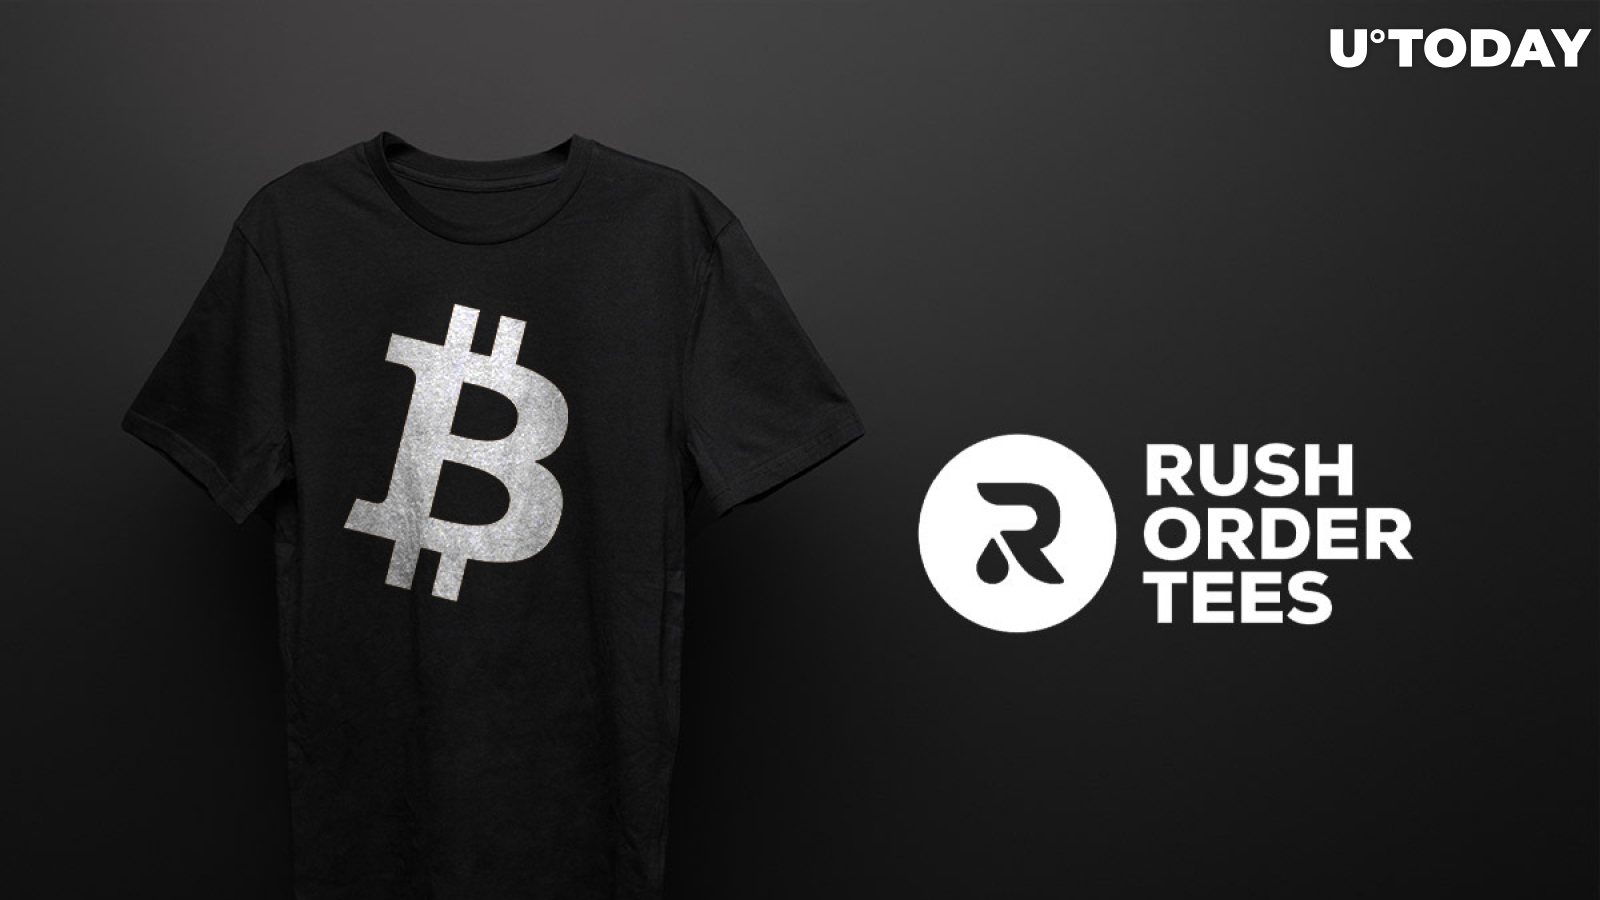 Leading T-Shirt Printing Company to Convert Its Cash Reserves to Bitcoin, Ethereum and Other Cryptocurrencies